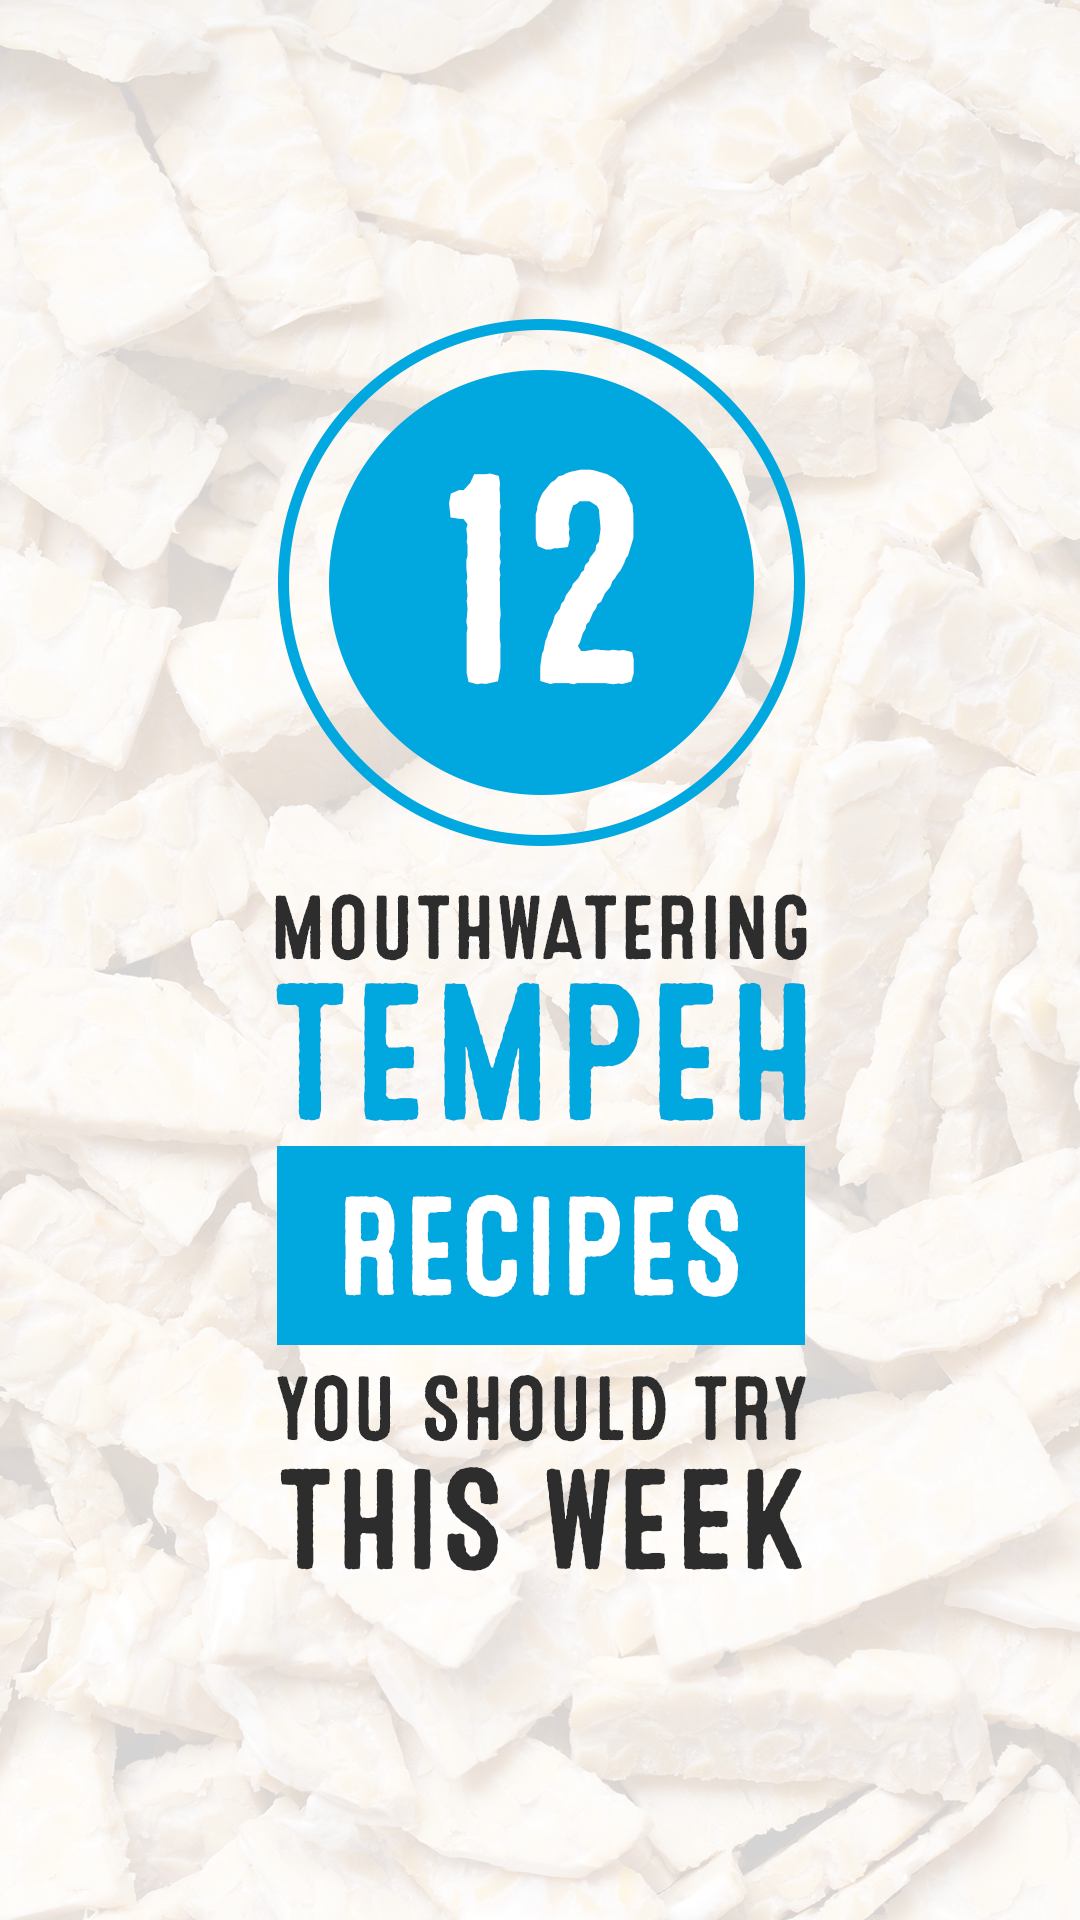 12 Mouthwatering Tempeh Recipes You Should Try This Week